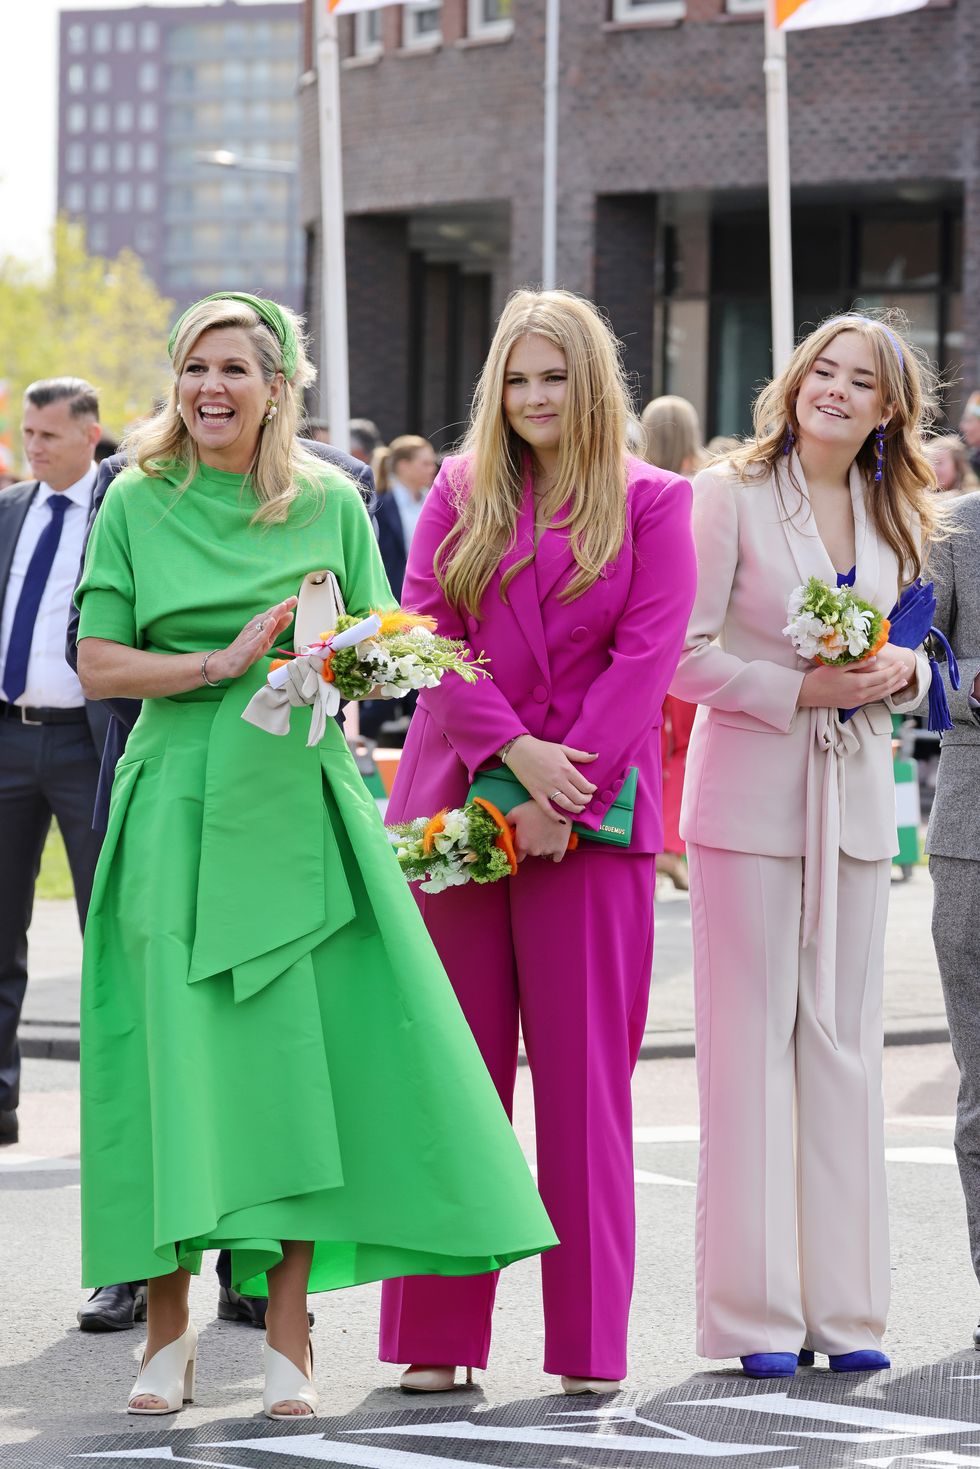 rotterdam, netherlands april 27 queen maxima of the netherlands, princess amalia of the netherlands and princess ariane of the netherlands during kingsday celebrations on april 27, 2023 in rotterdam, netherlands king willem alexander and his family are celebrating king's day and his tenth anniversary as king of the netherlands in rotterdam photo by andreas rentzgetty images